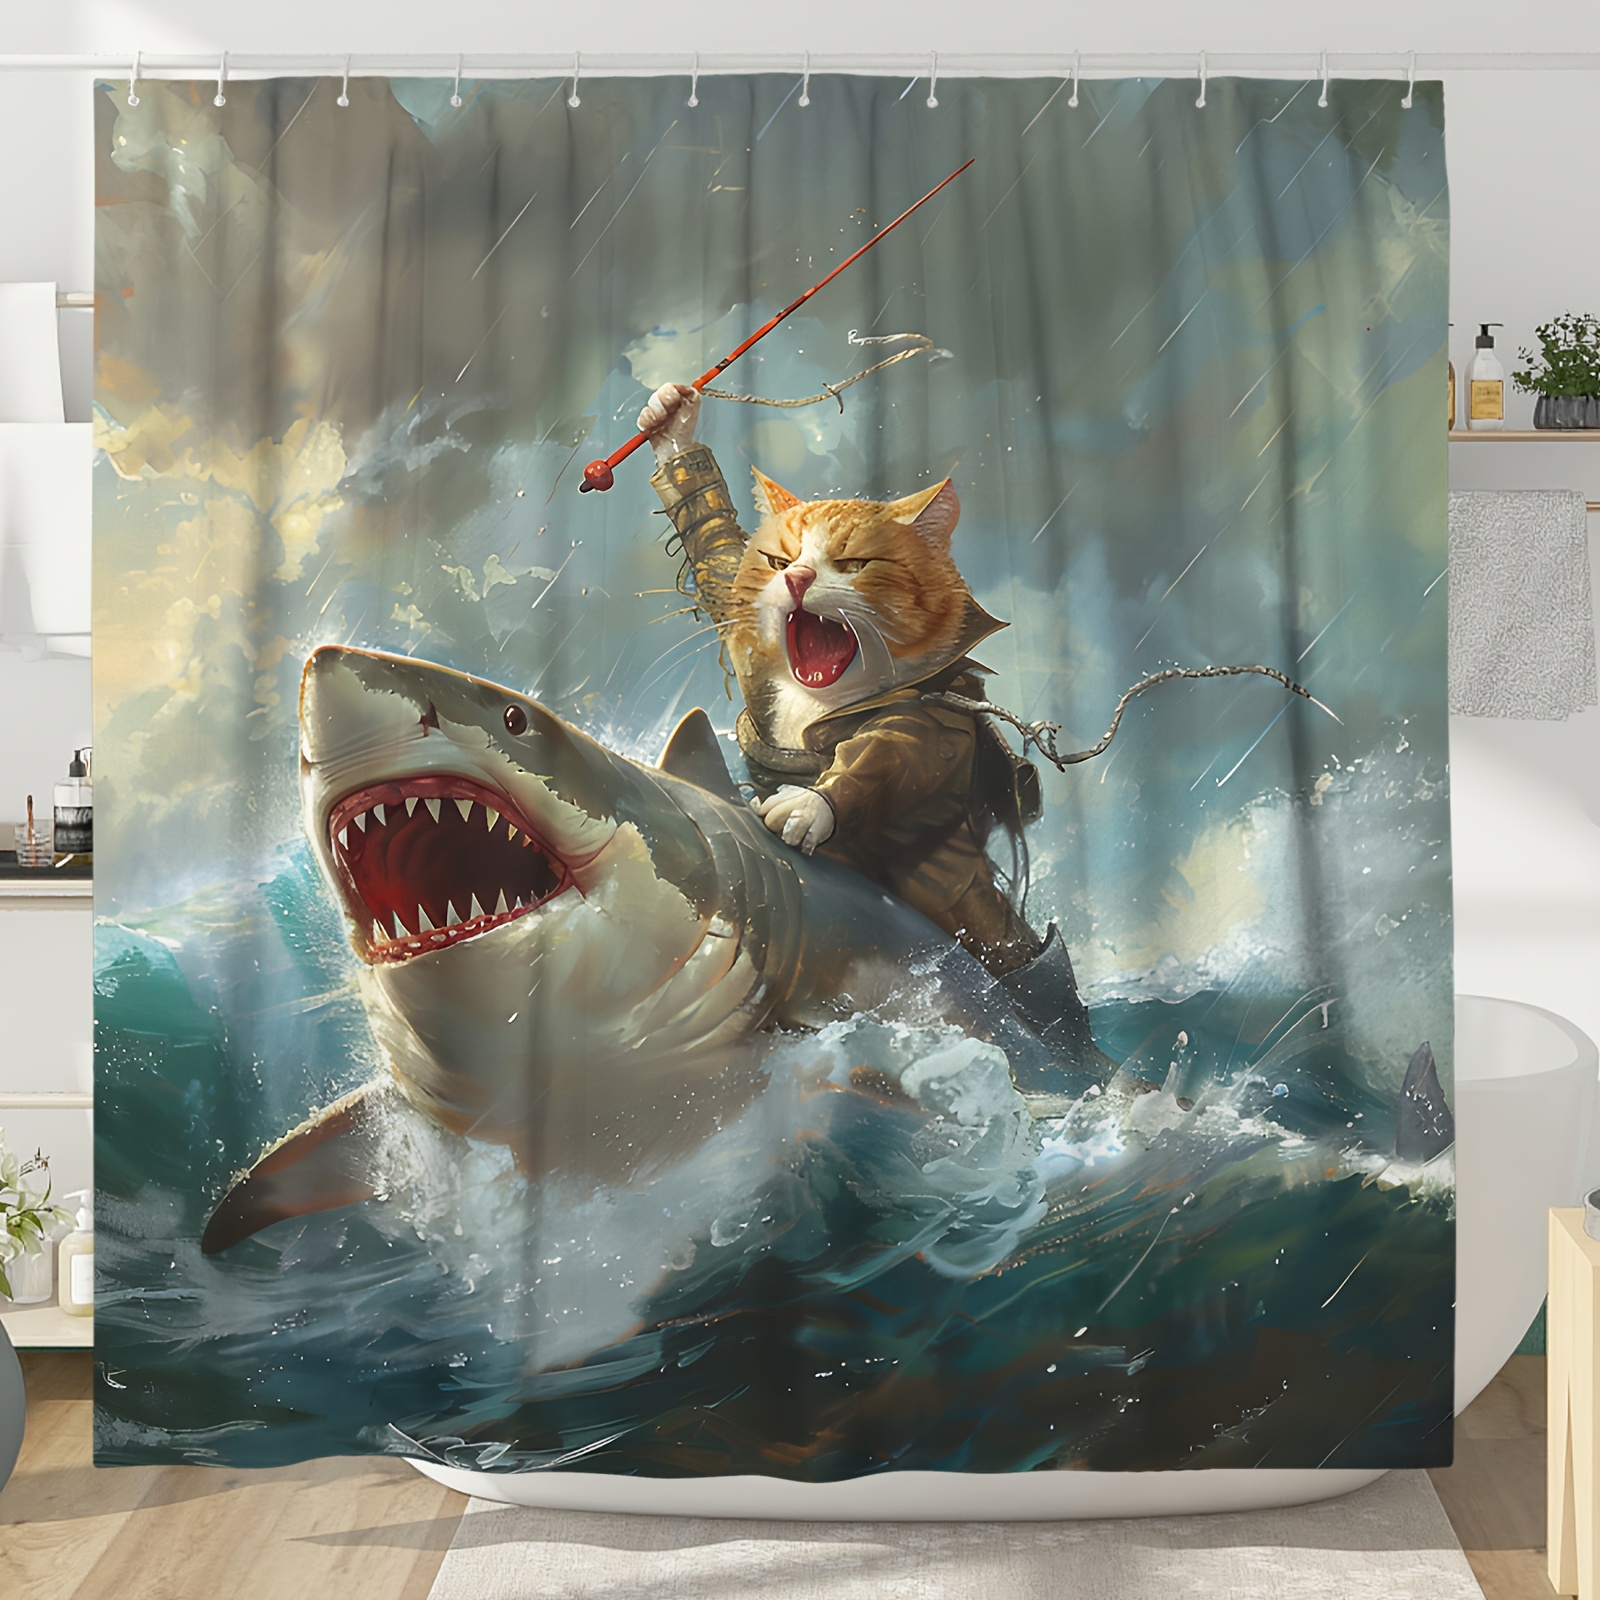 

Water-resistant Polyester Shower Curtain With Cat Riding Shark Print – Animal-themed Bathroom Decor With 12 Hooks, Machine Washable, Woven, Fun Ocean Adventure Design, Unlined, 71x71 Inches